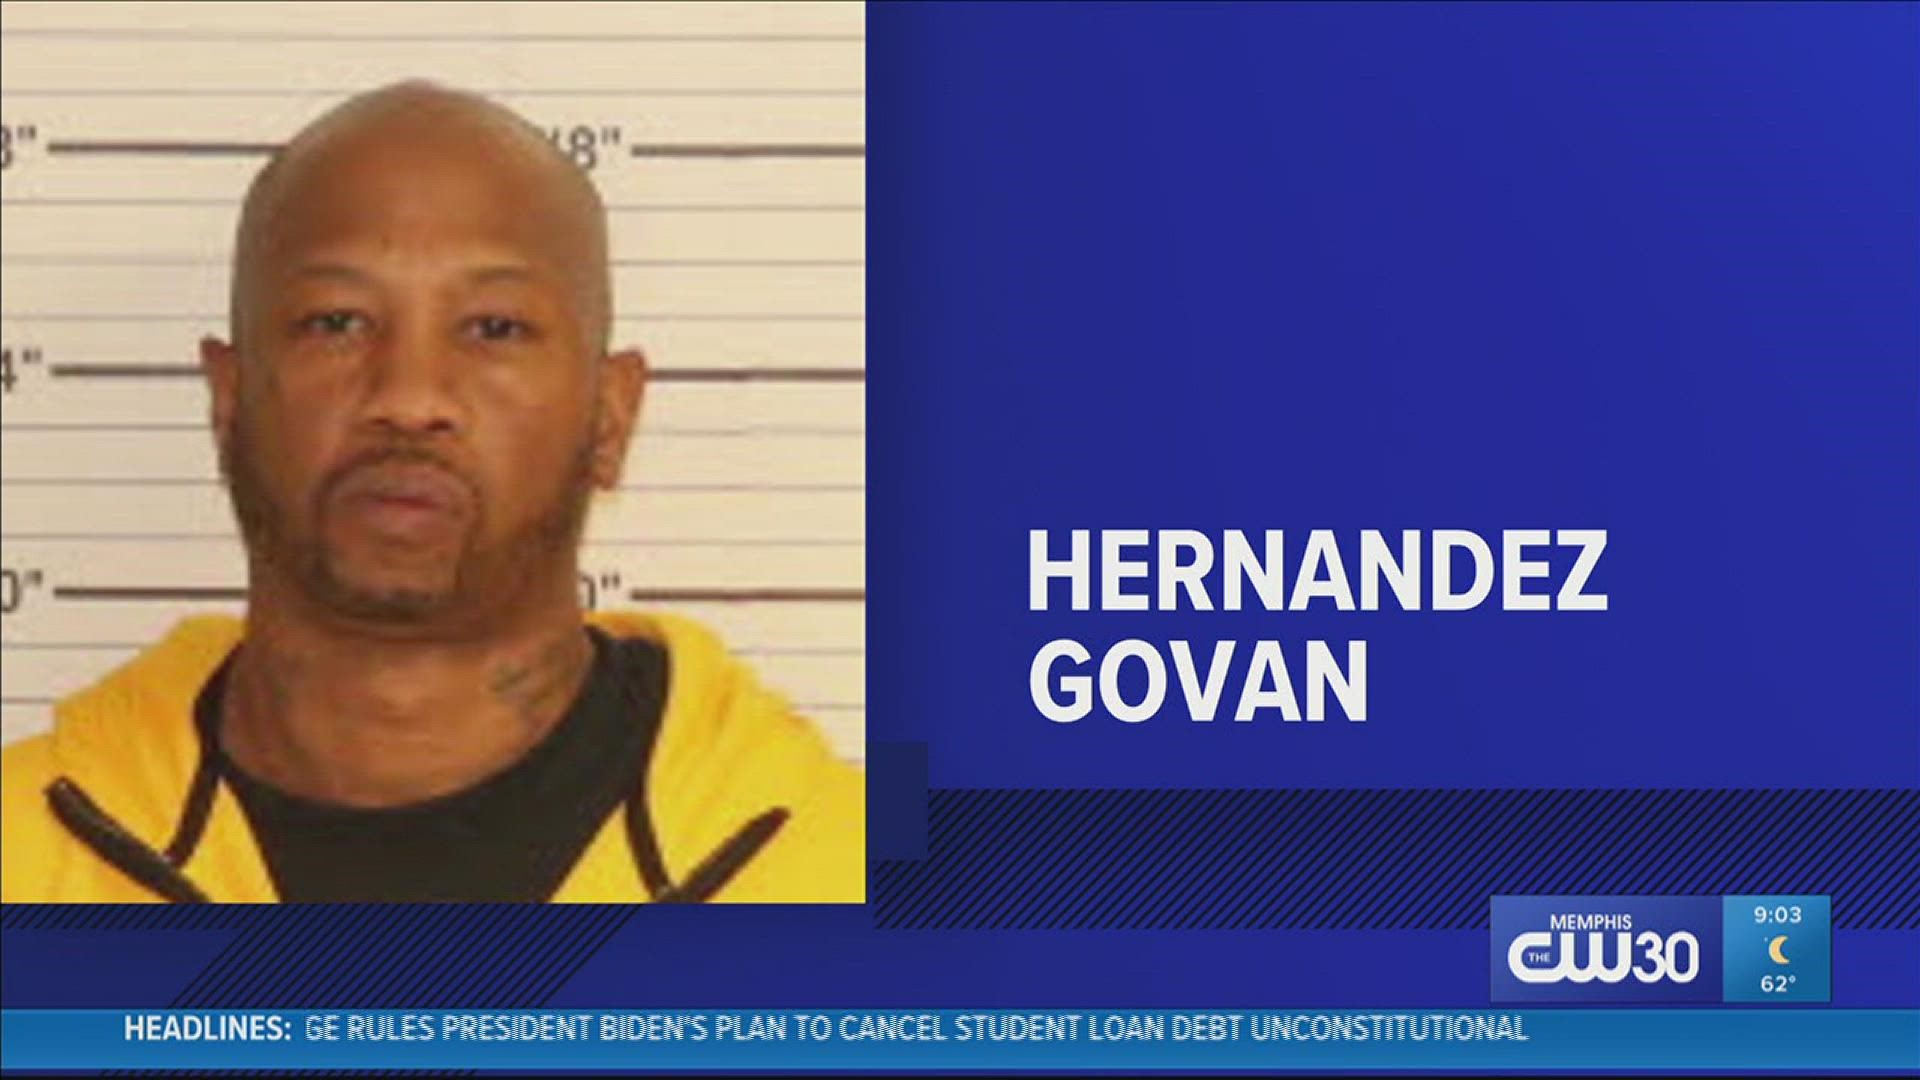 Hernandez Govan was indicted on three charges Thursday in connection to Young Dolph's murder.